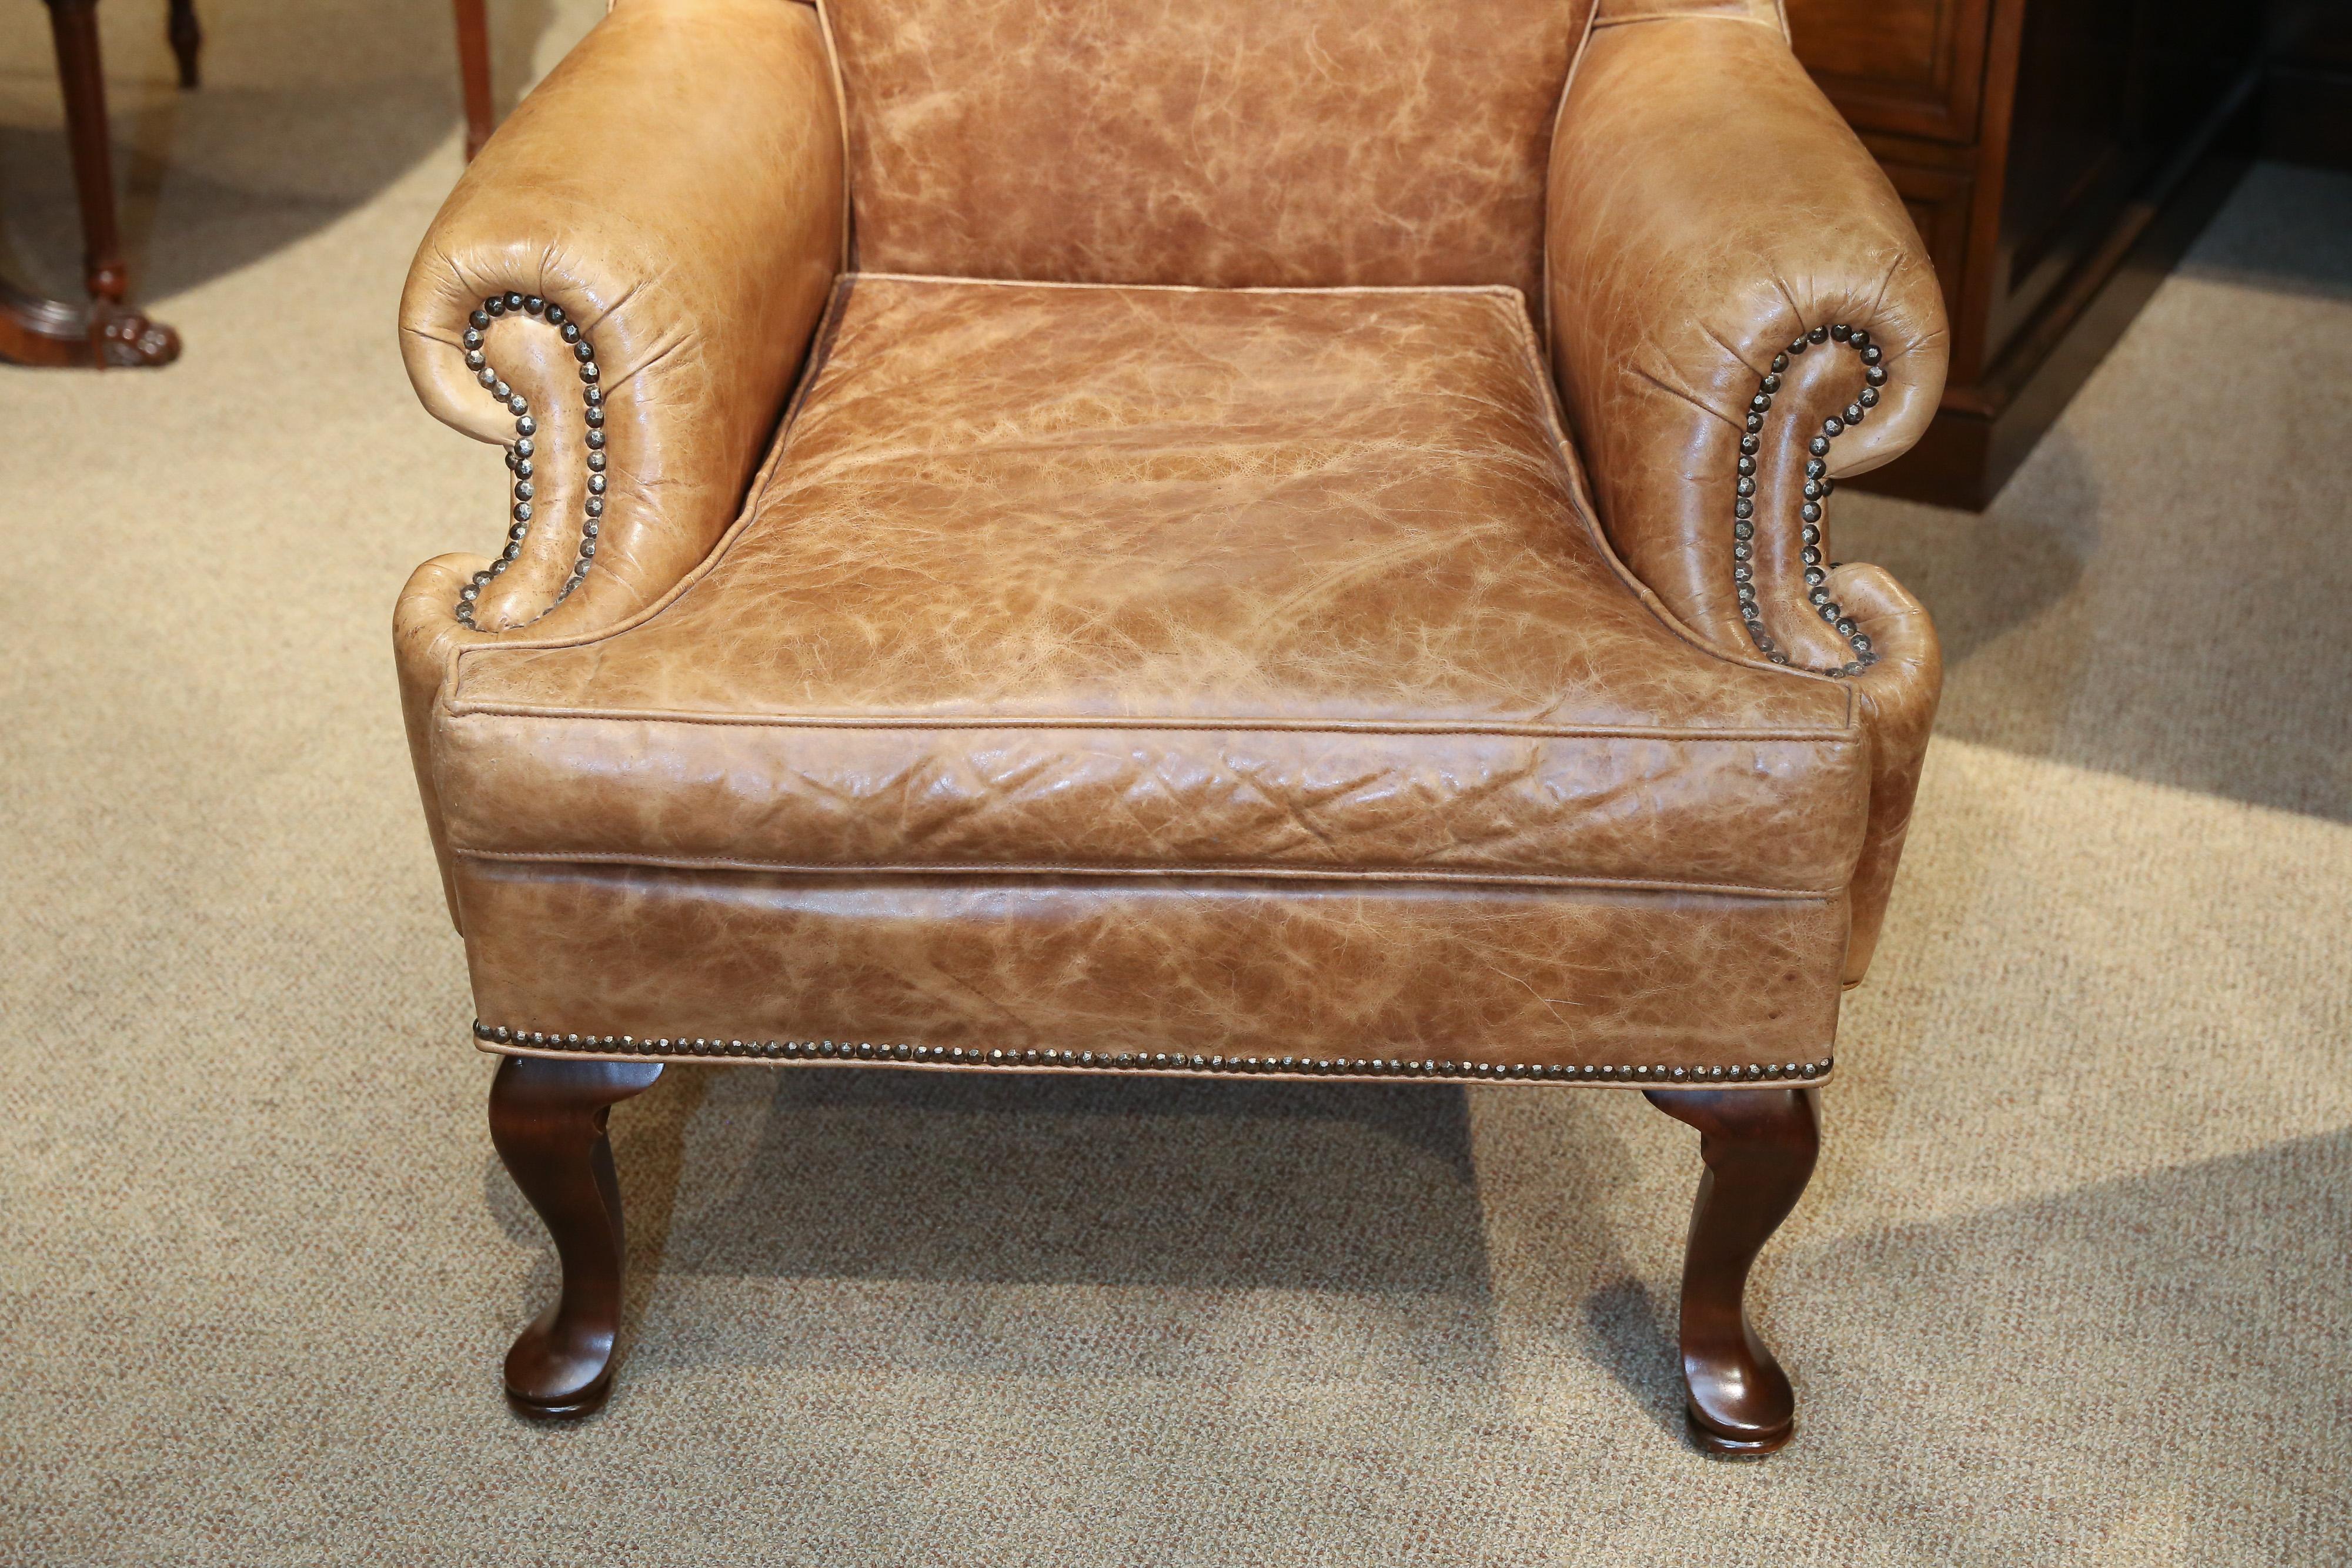 Soft gold color leather upholstered wingback chairs
Each with a serpentine seat cushion and cabriole legs
with pad feat. Trimmed with brass tacks.